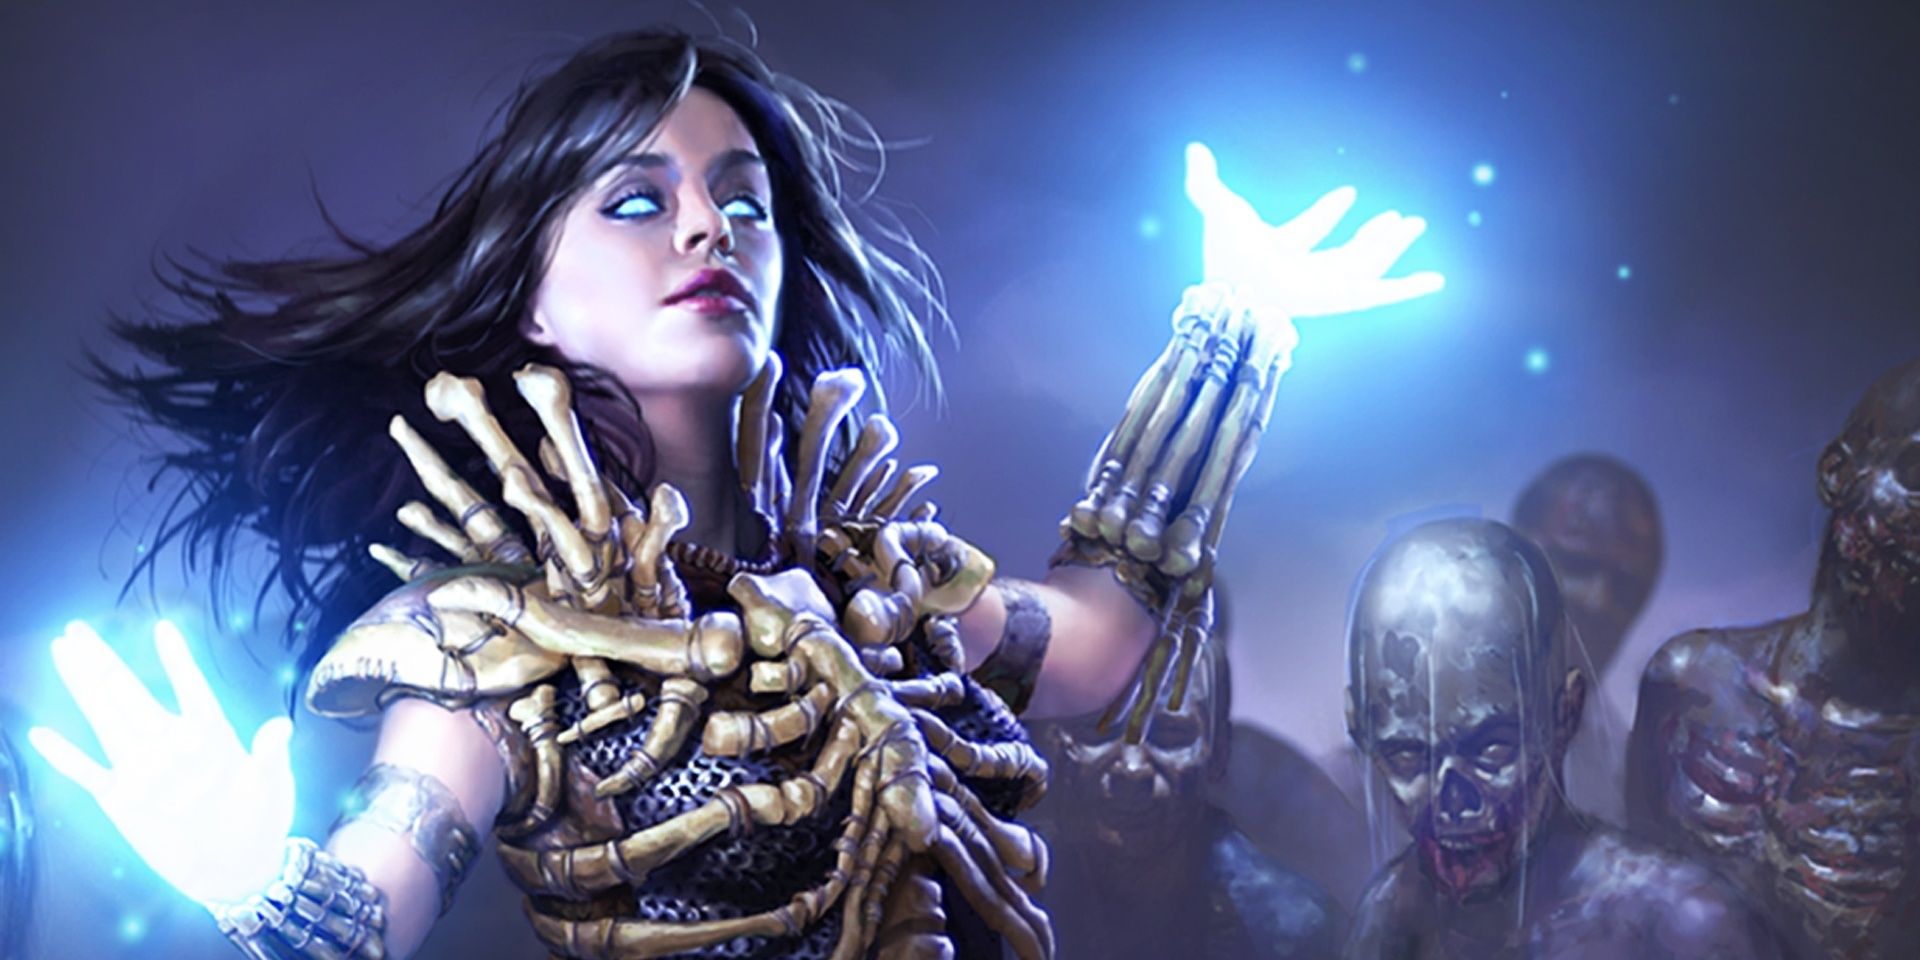 Path of Exile Necromancer with blue glowing eyes and hands controlling zombies and skeletons behind her